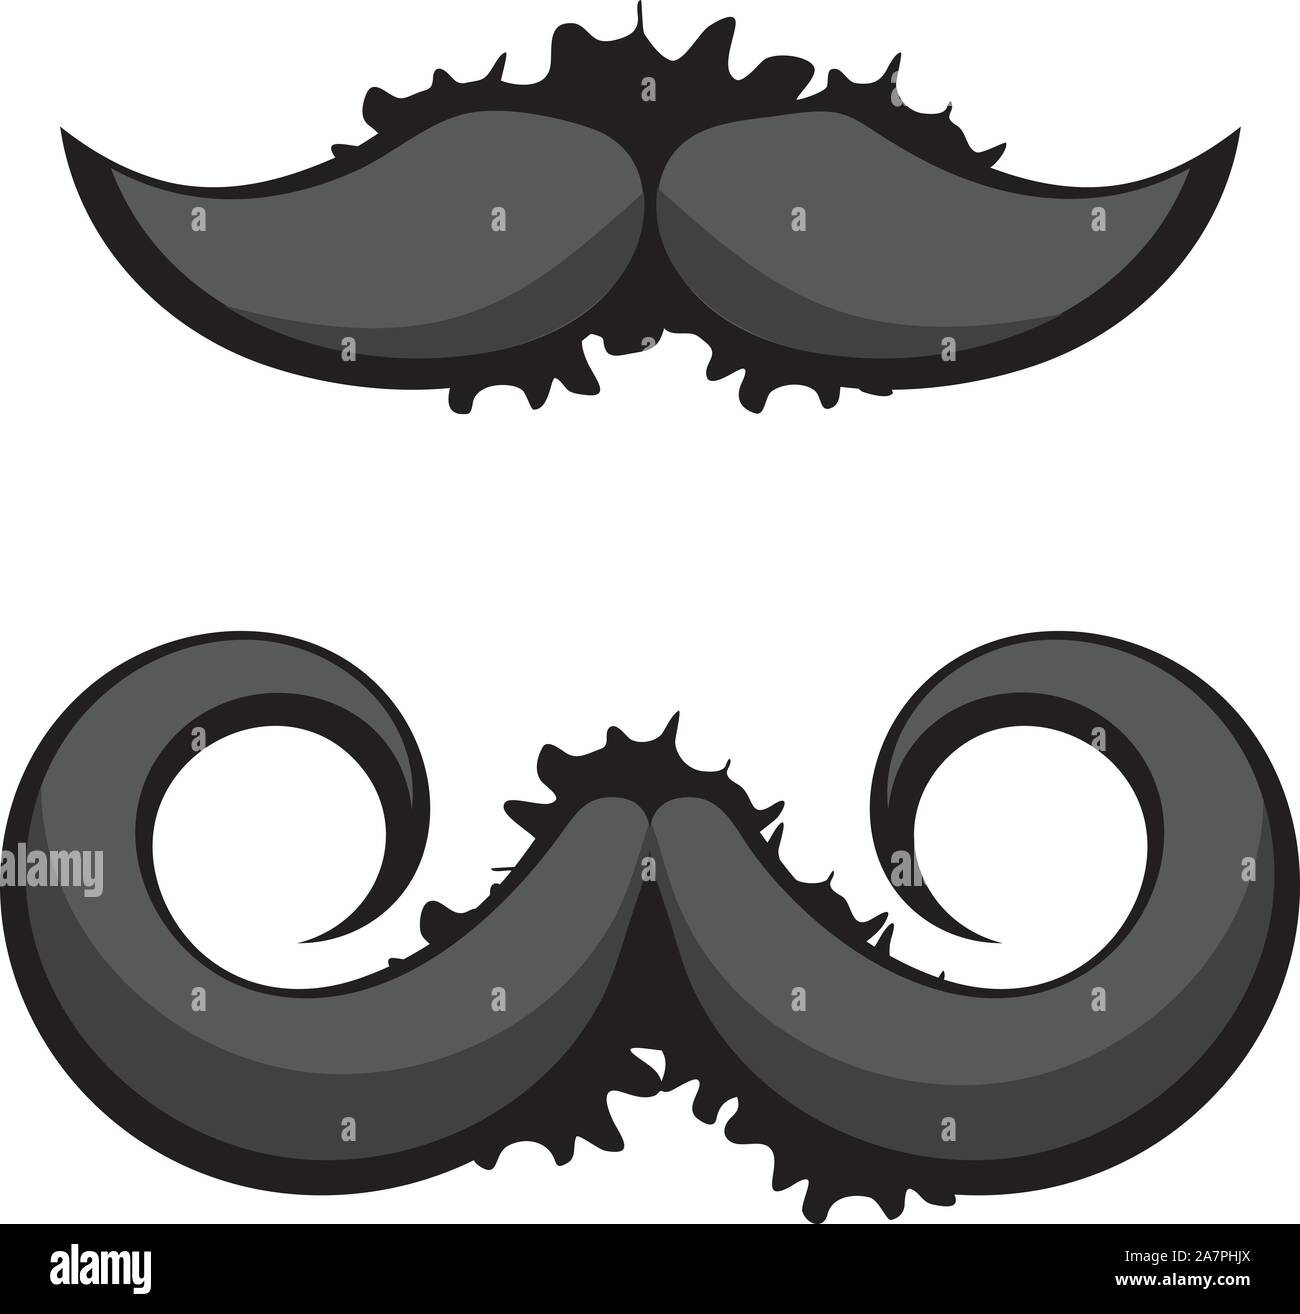 Black mustaches with grunge splatters on white background. Stock Vector